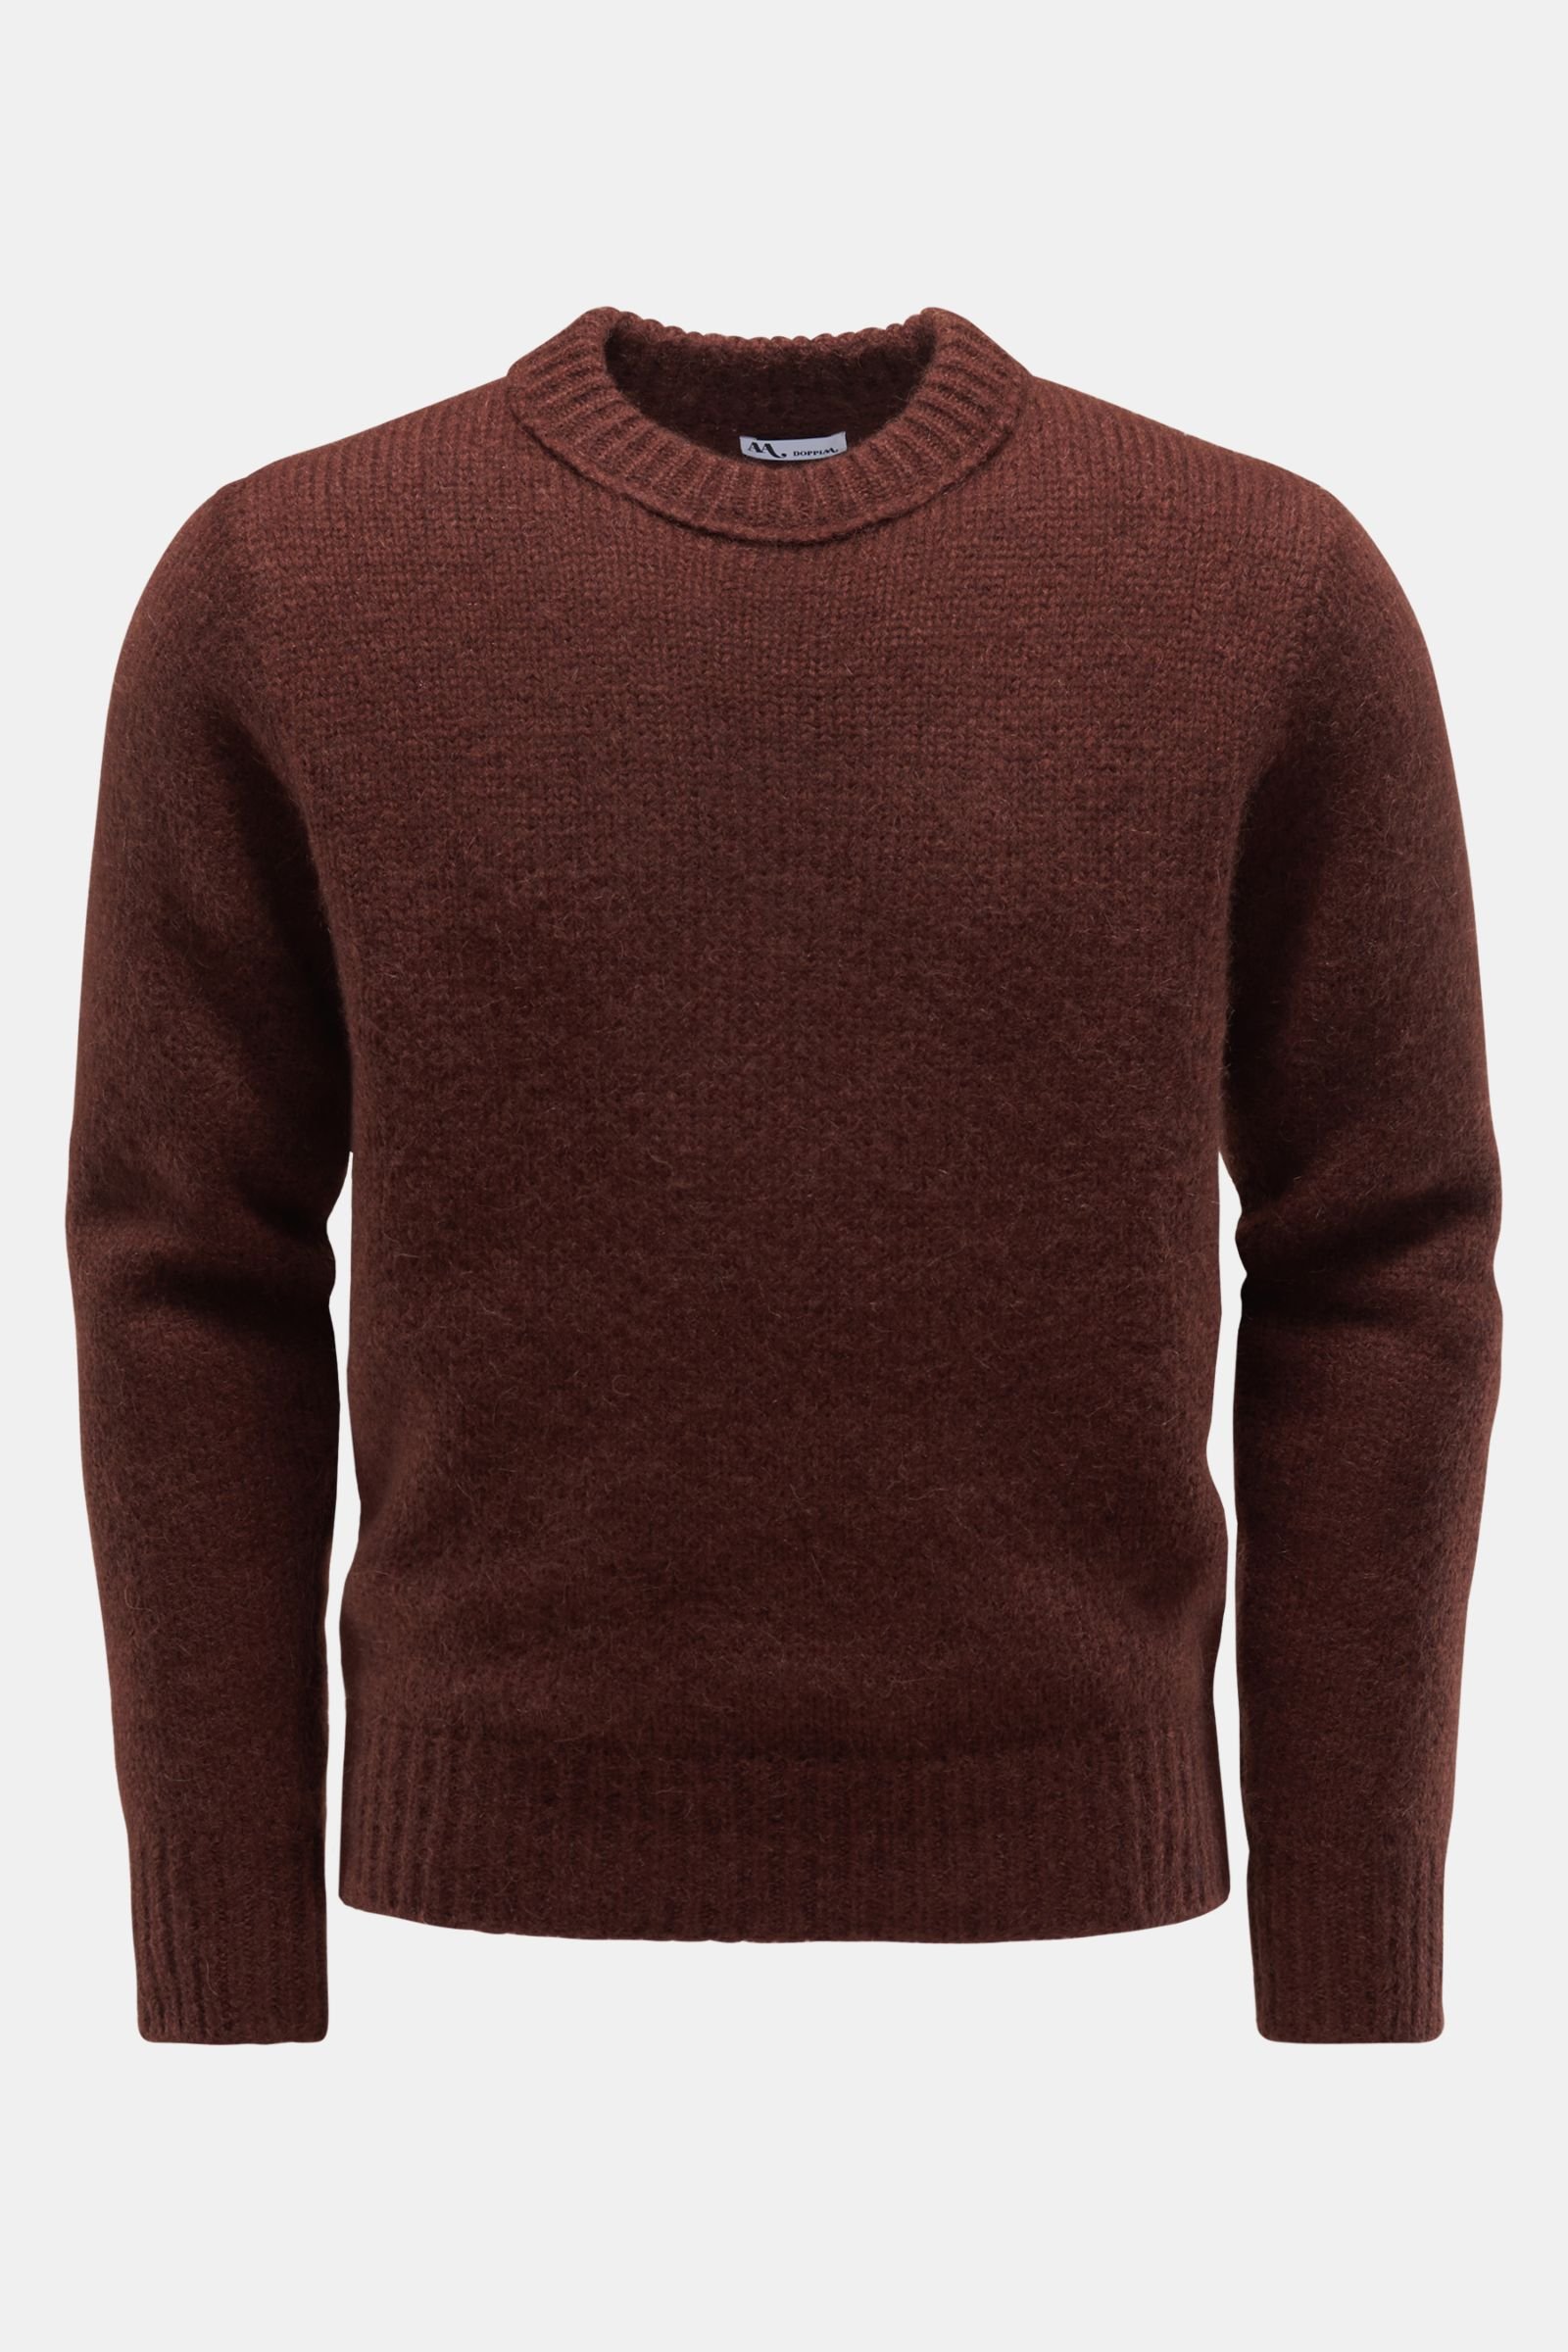 Crew neck jumper 'Aappio' red brown